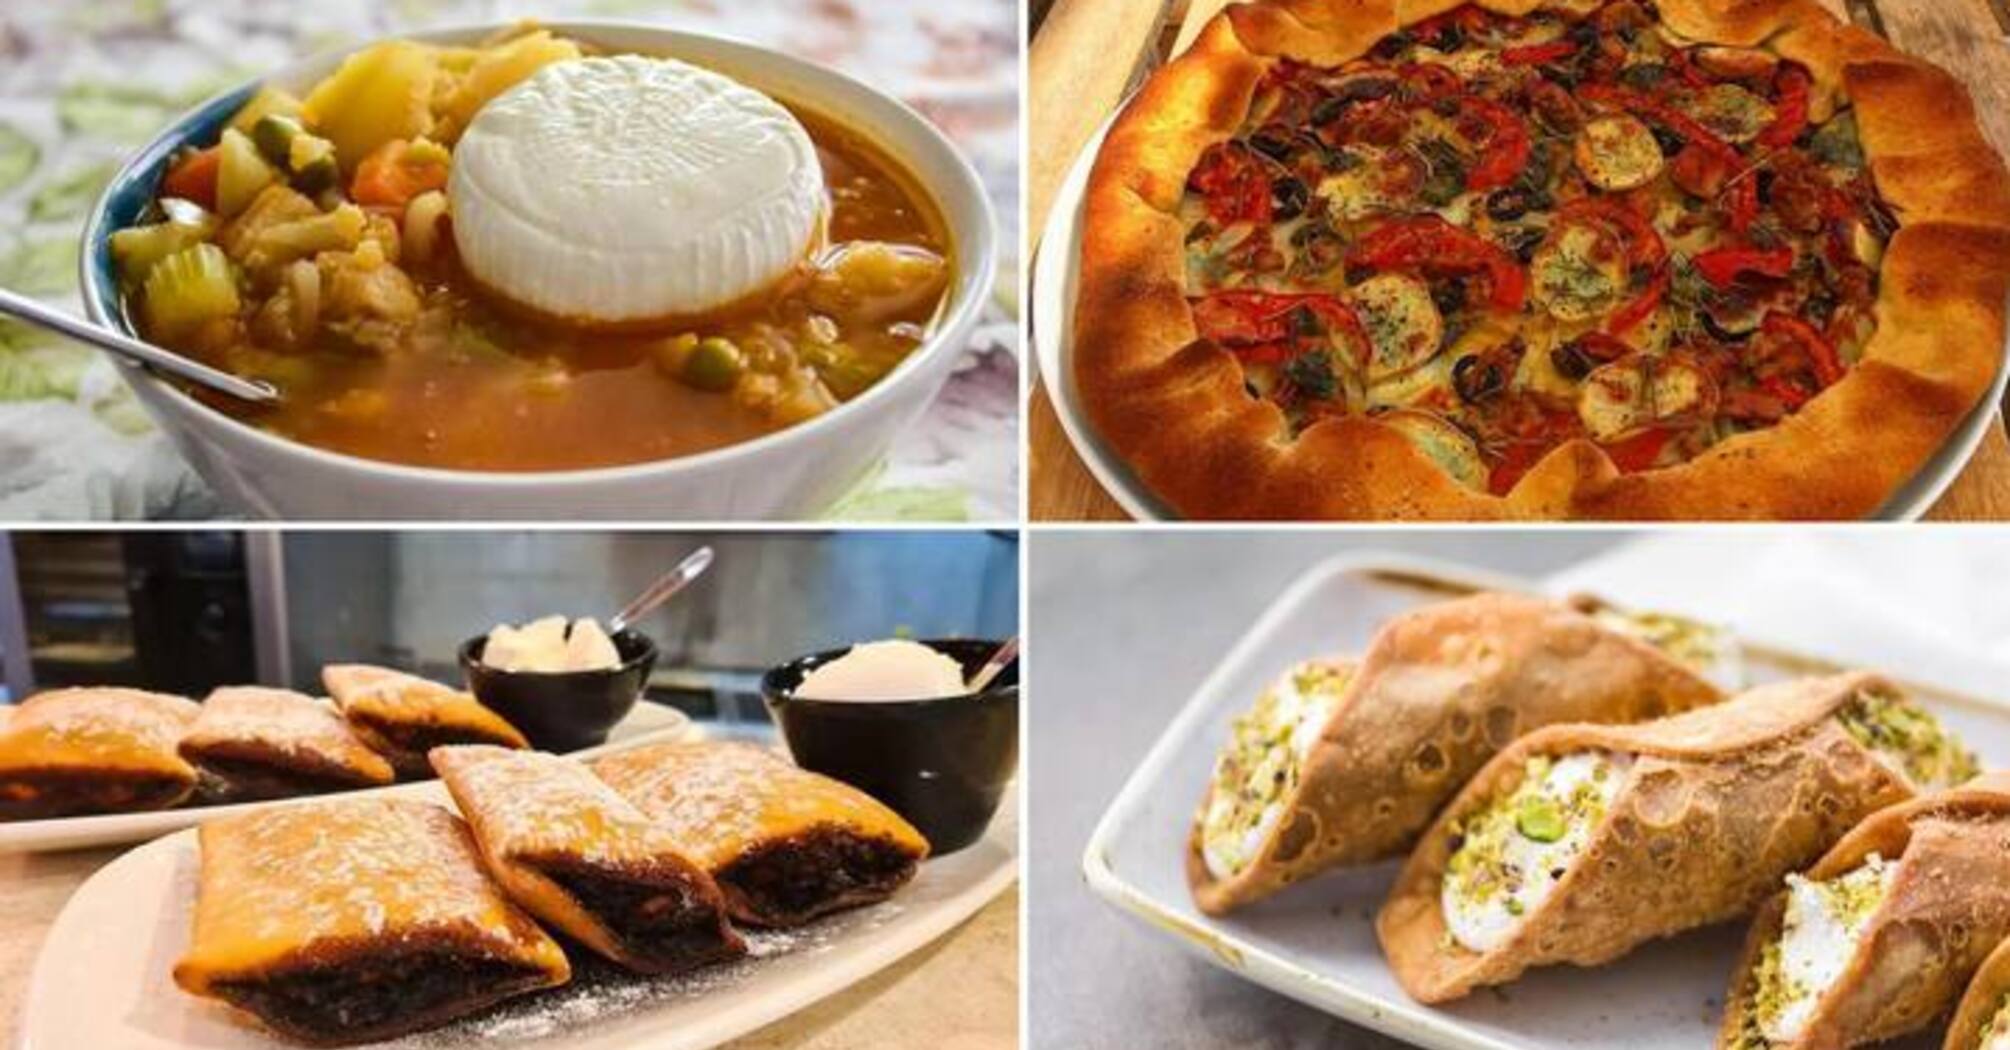 Soppa tal-Armla and cannoli: dishes for vegetarians to try in Malta